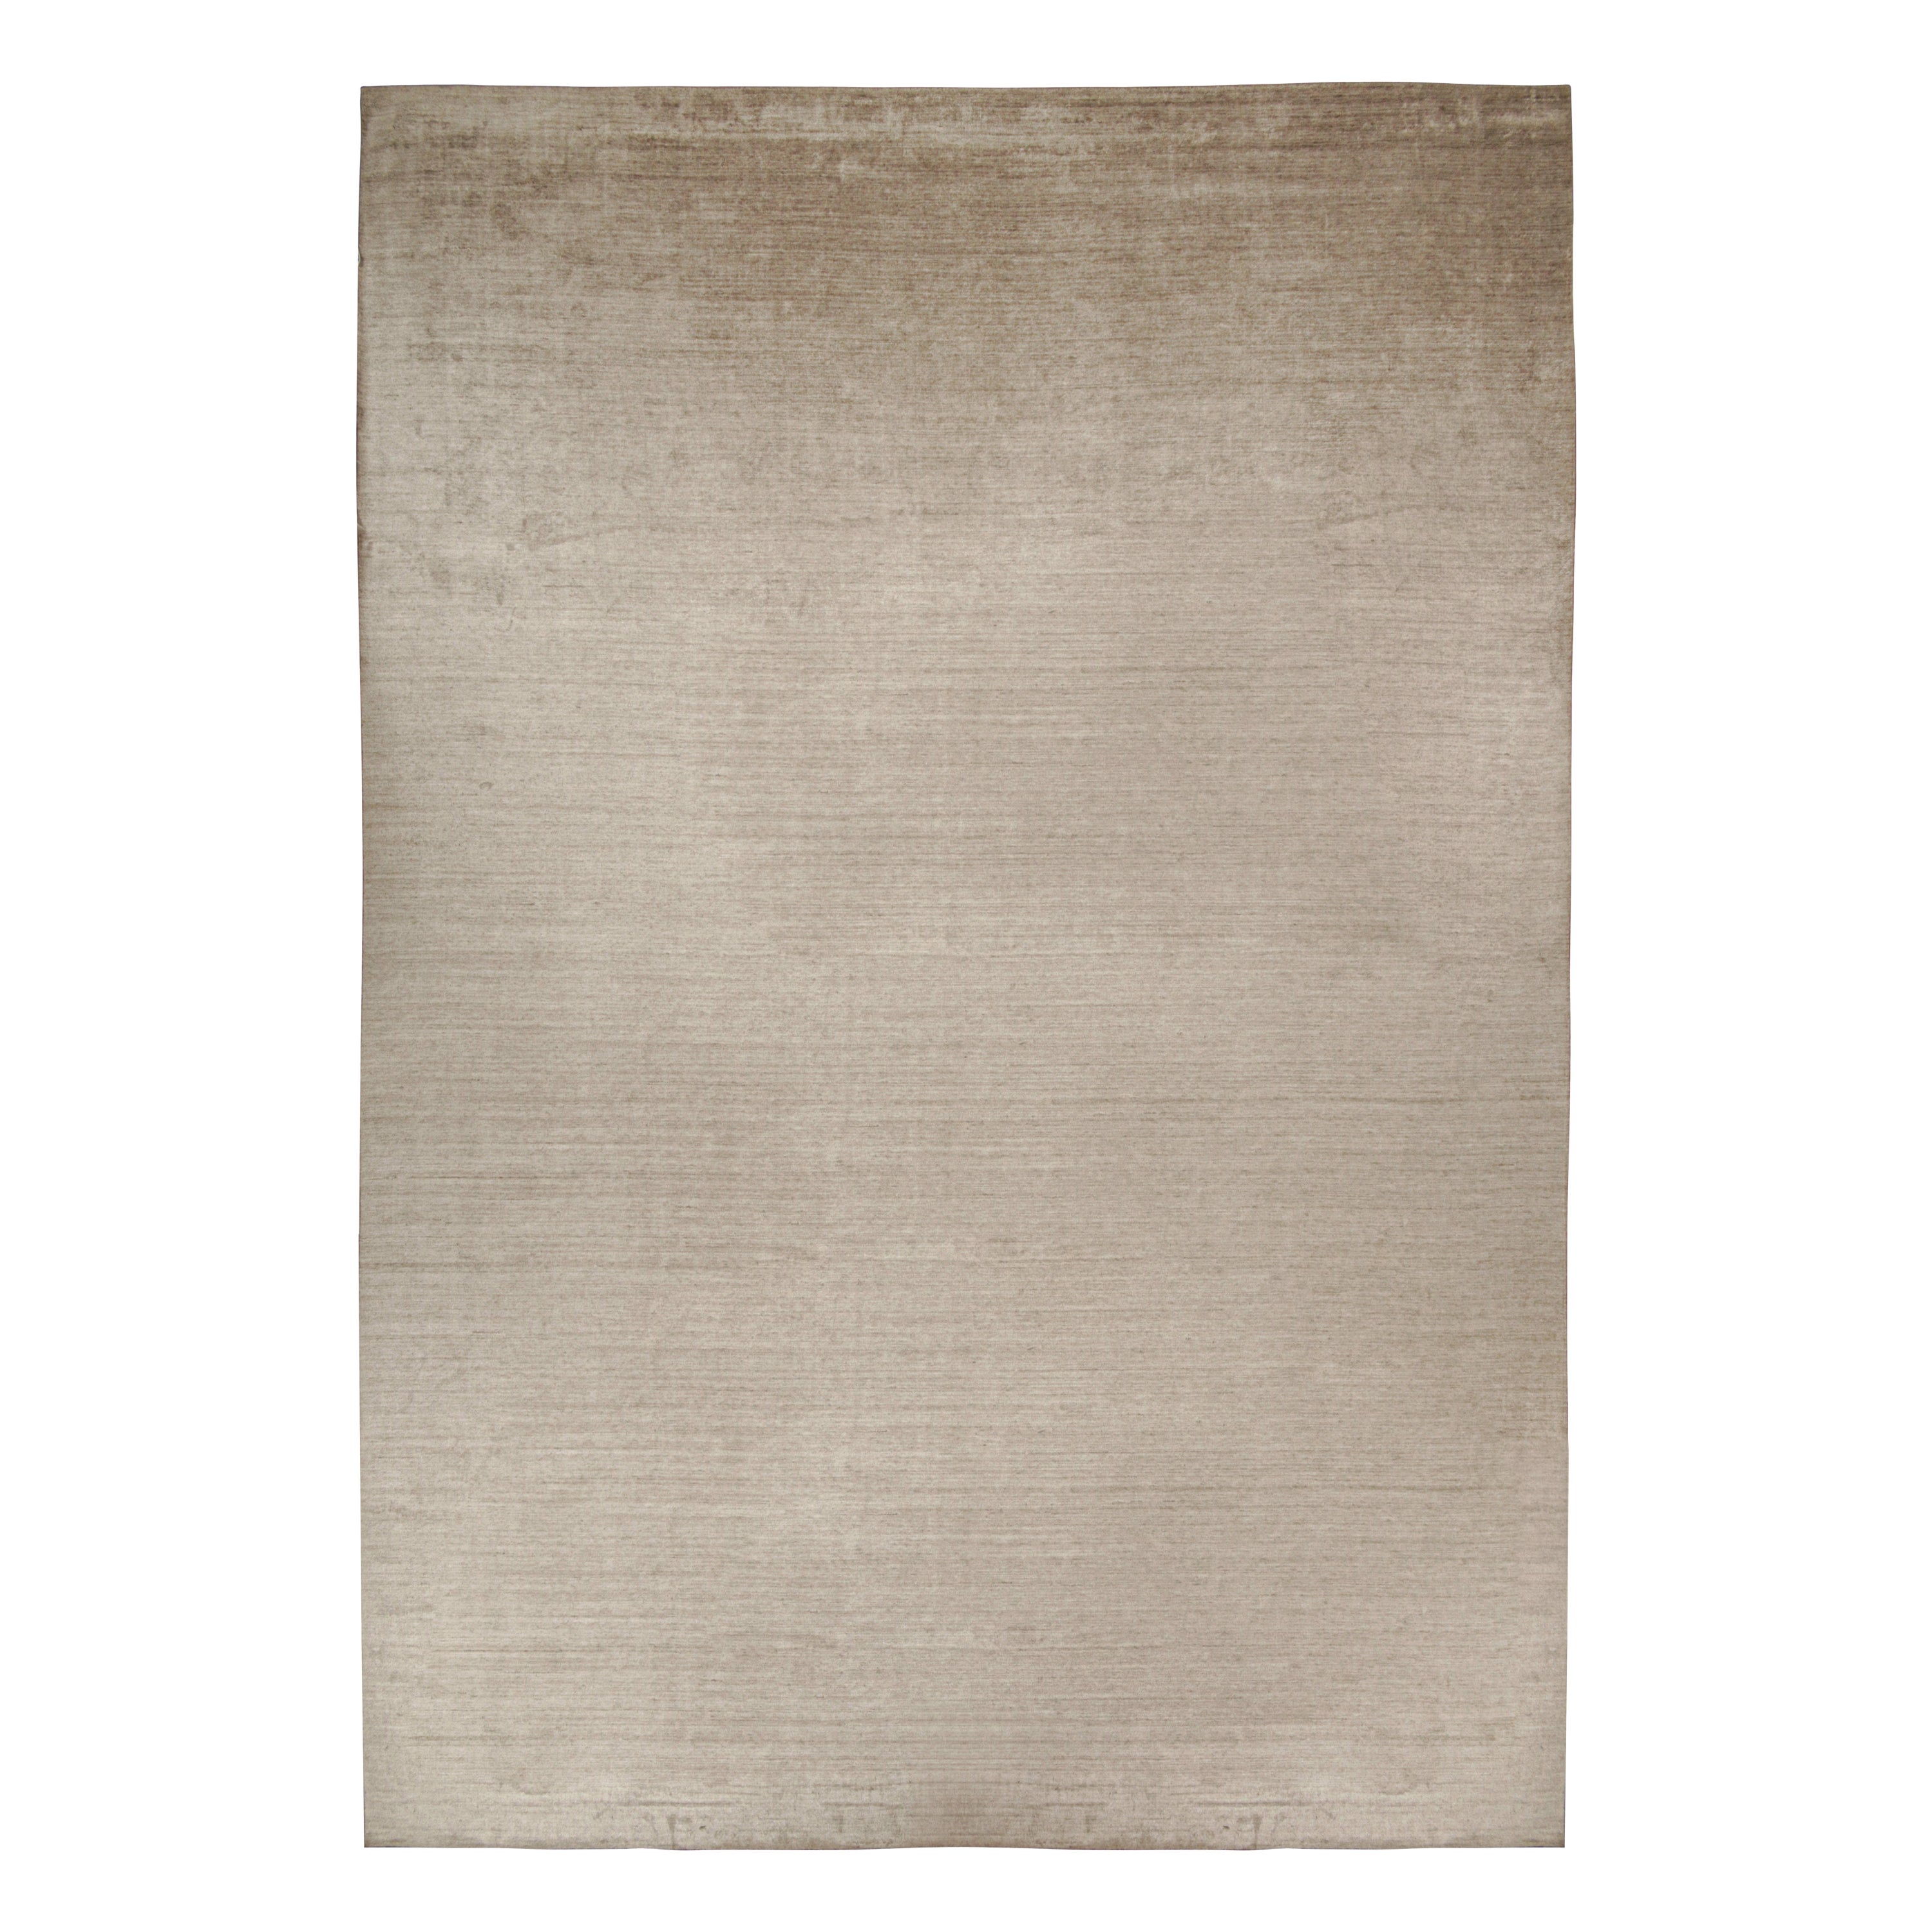 Rug & Kilim’s Contemporary Palace-Sized Solid Rug in Beige and Gray Tones